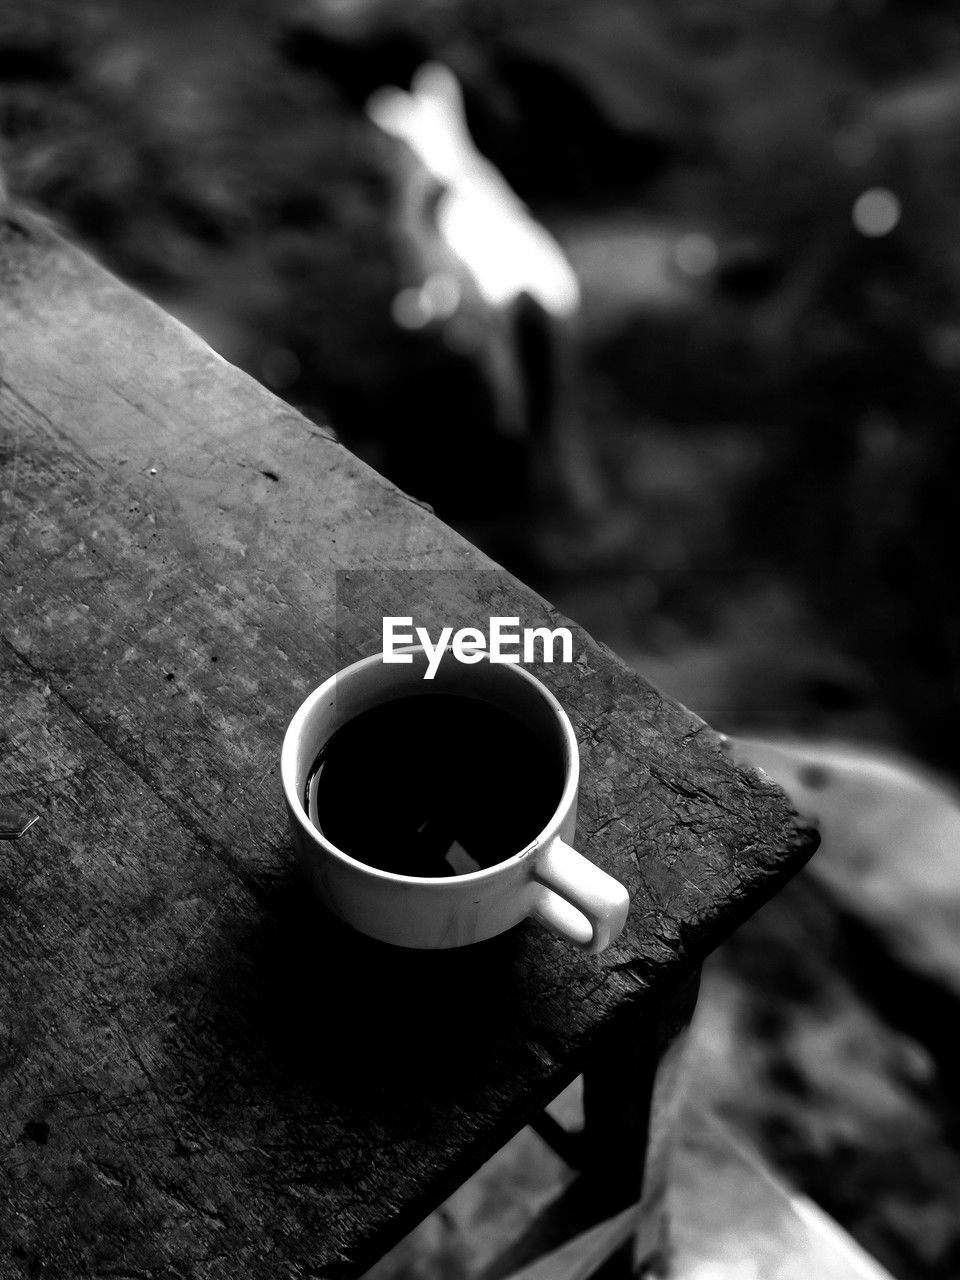 black, black and white, white, monochrome, monochrome photography, darkness, cup, drink, mug, close-up, coffee, focus on foreground, food and drink, coffee cup, refreshment, light, wood, macro photography, hot drink, no people, day, outdoors, high angle view